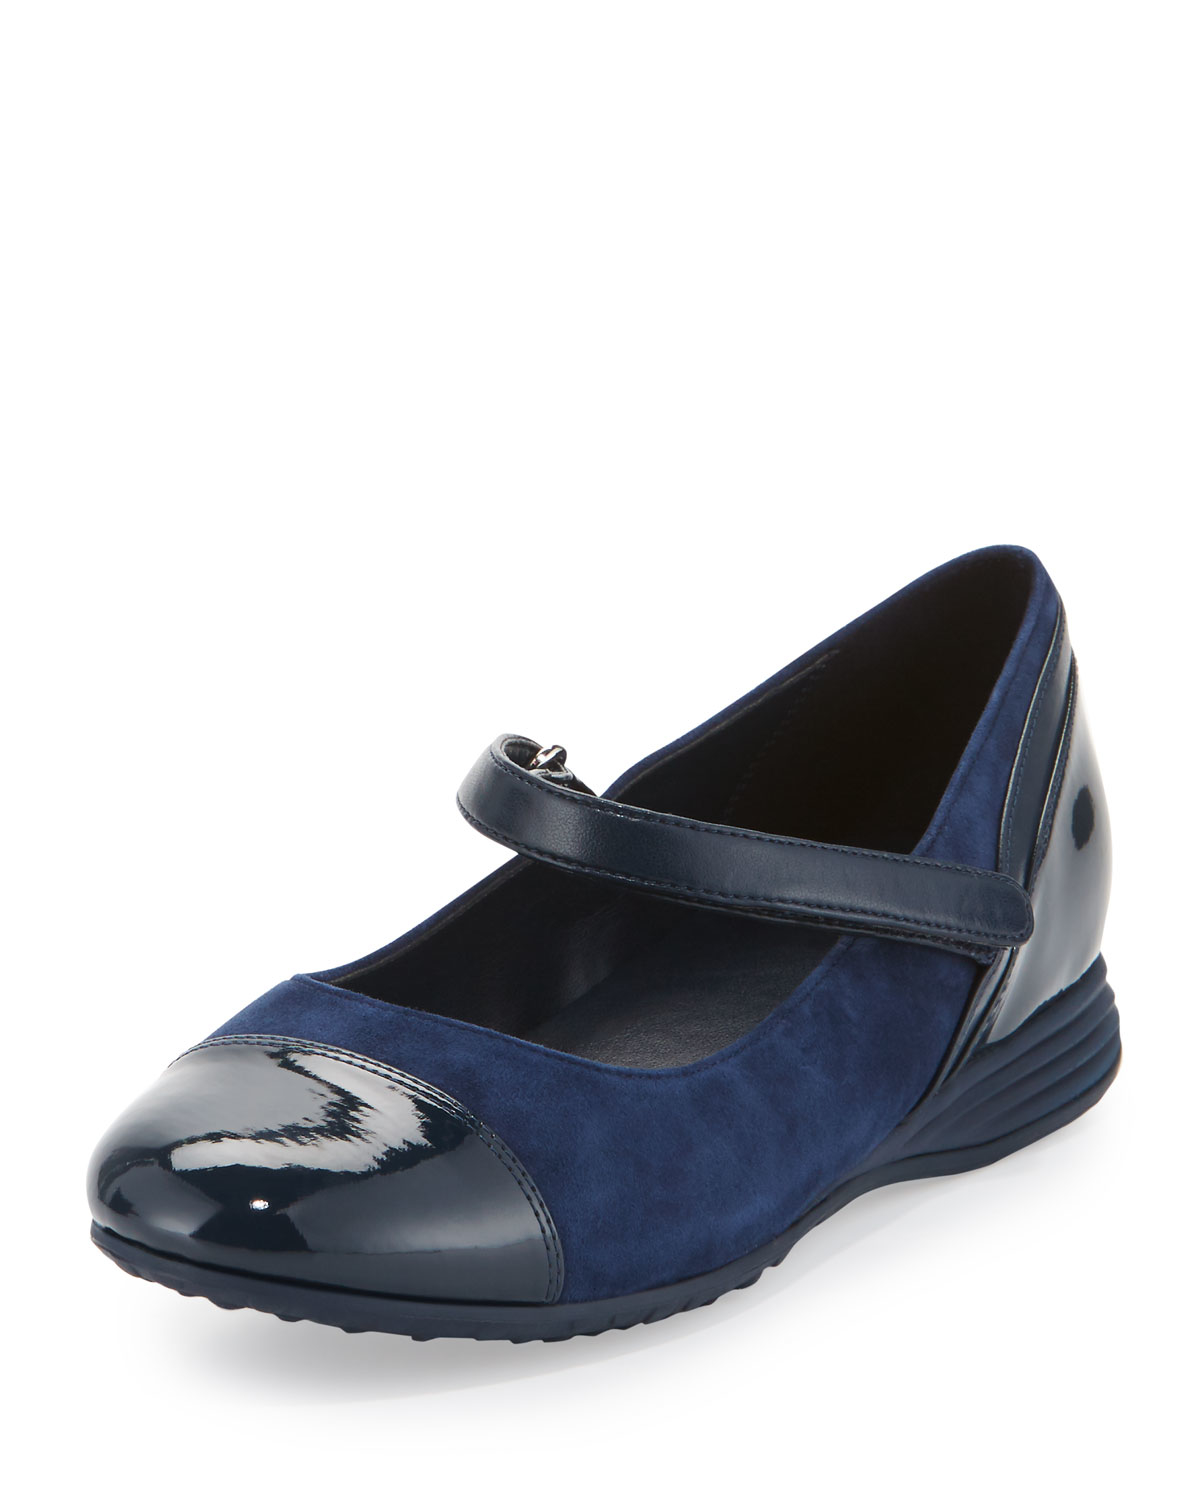 Lyst - Cole Haan Bria Patent & Suede Mary Jane Flat in Blue